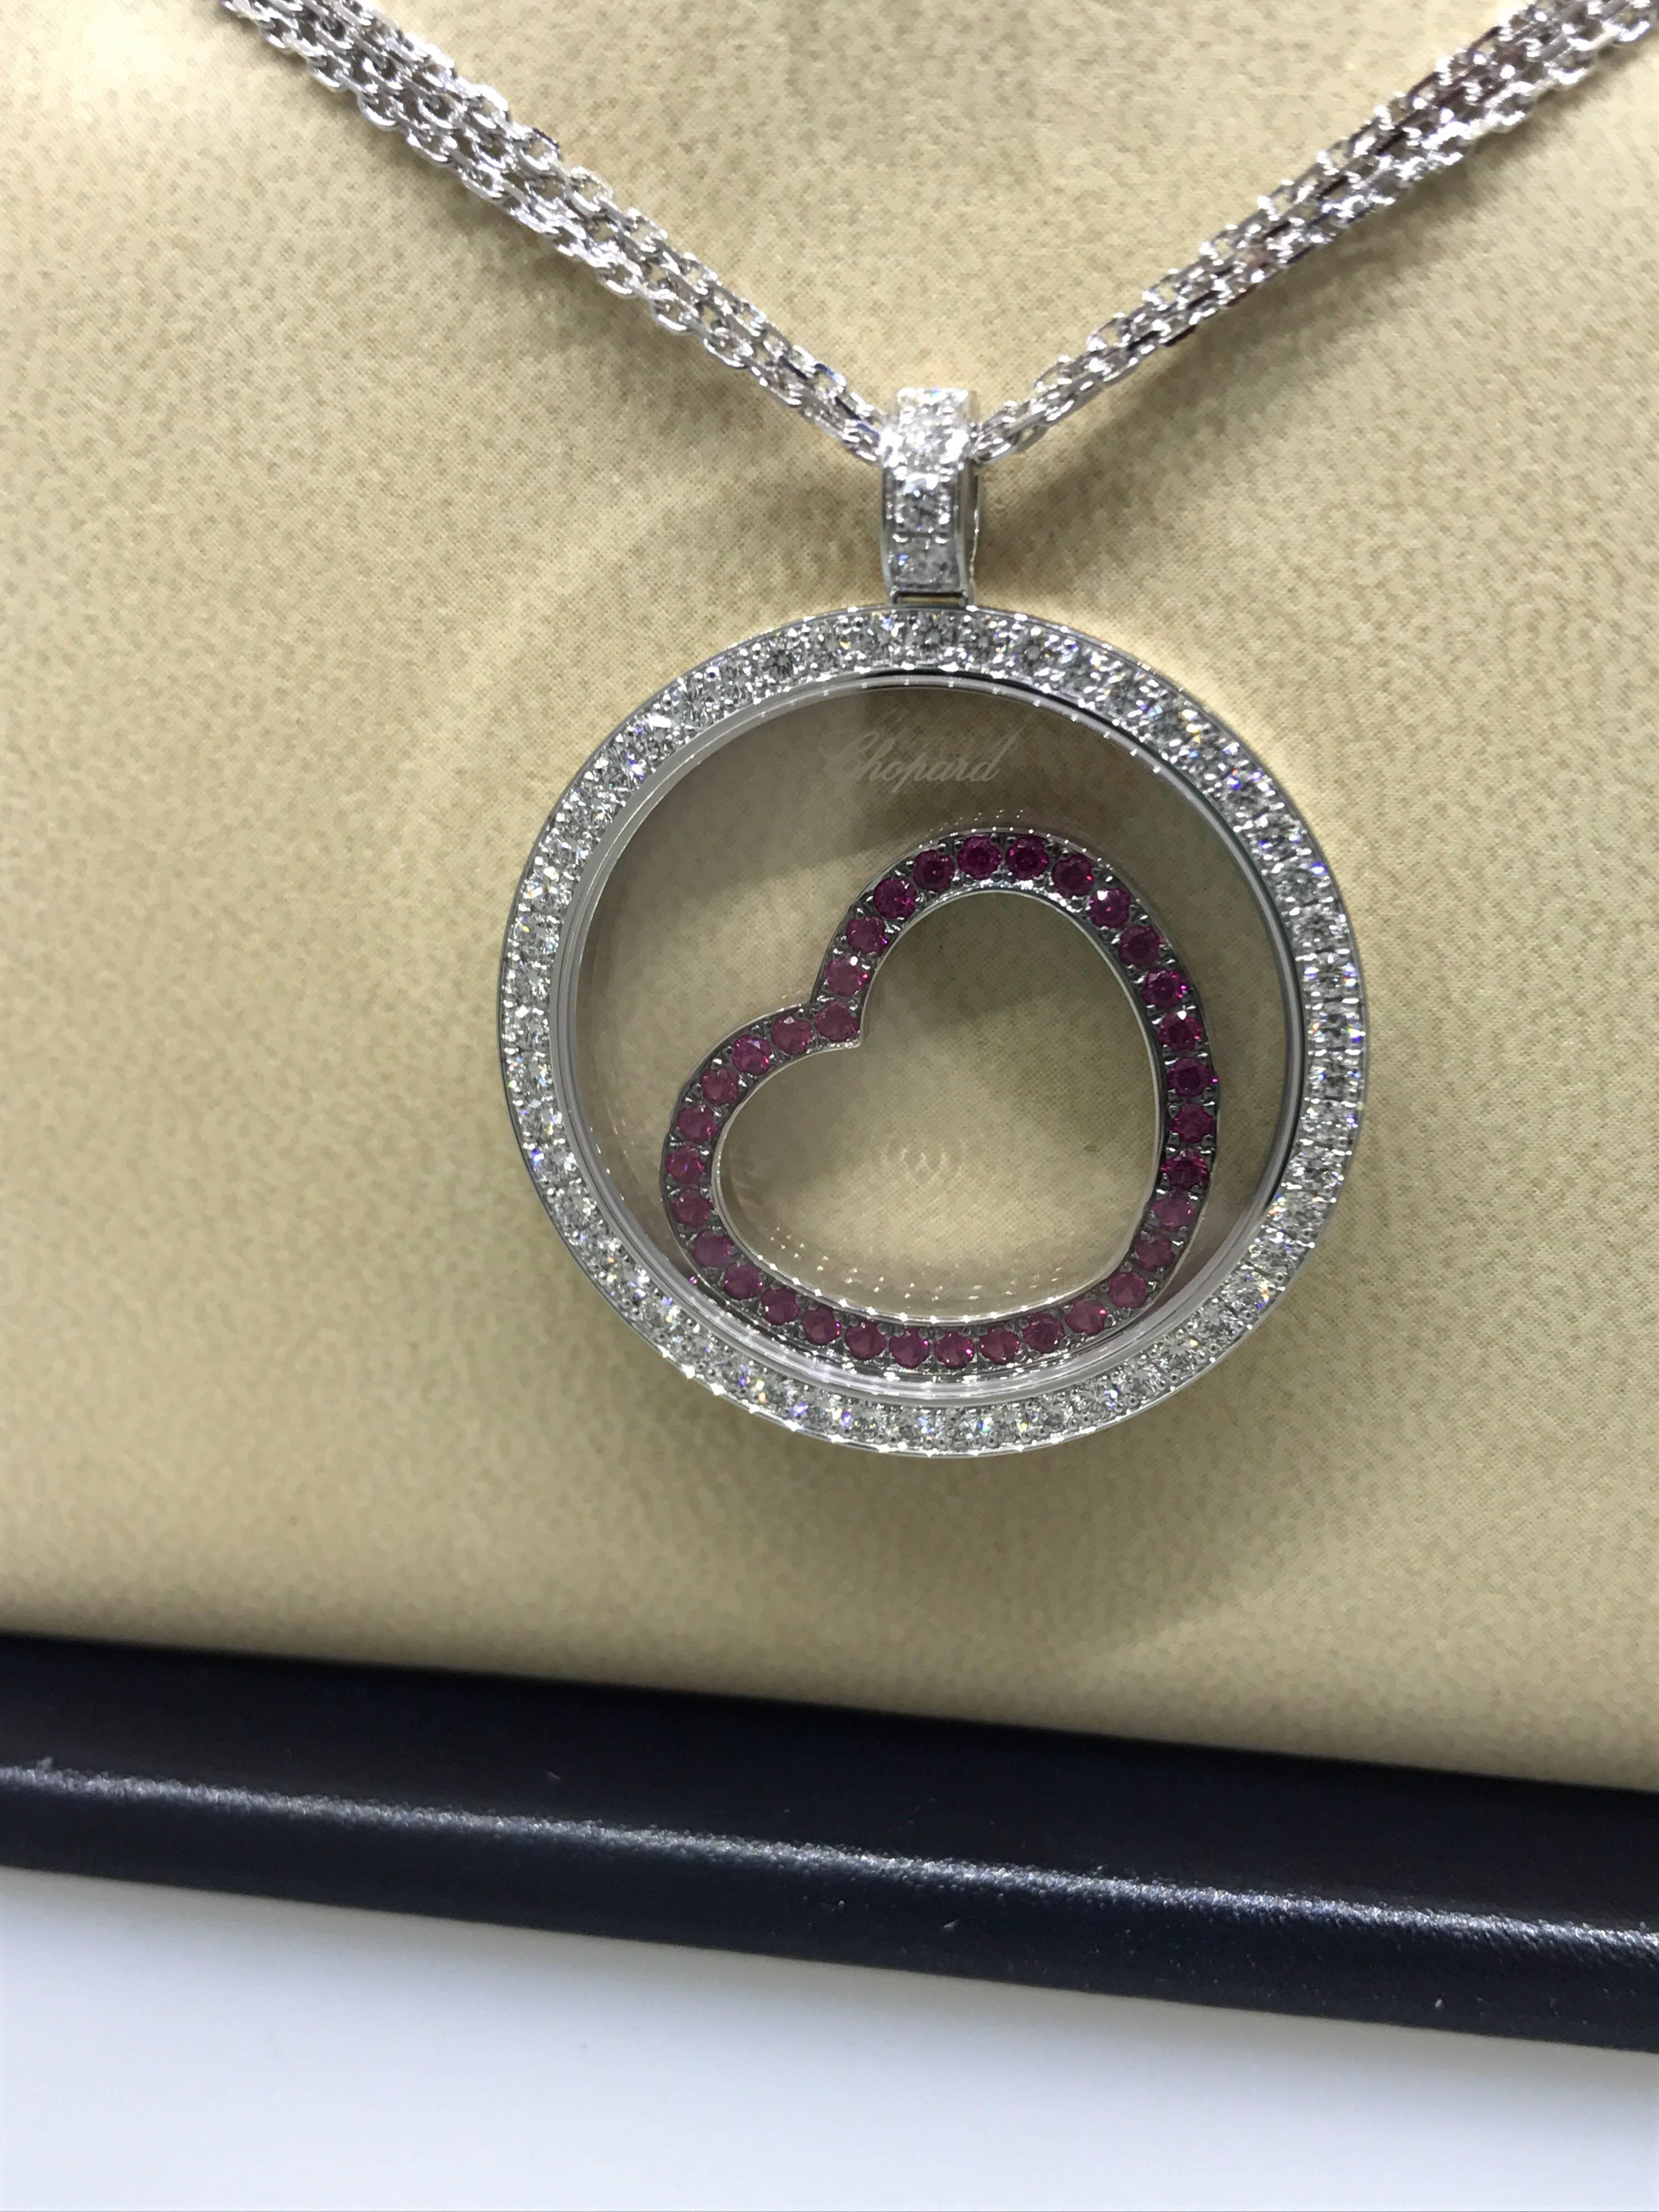 Chopard Happy Diamonds Heart Pendant / Necklace

Model Number: 79/5749-1003

100% Authentic

Brand New

Comes with original Chopard box, certificate of authenticity and warranty, and jewels manual

18 Karat White Gold (25.35gr)

56 Diamonds on the